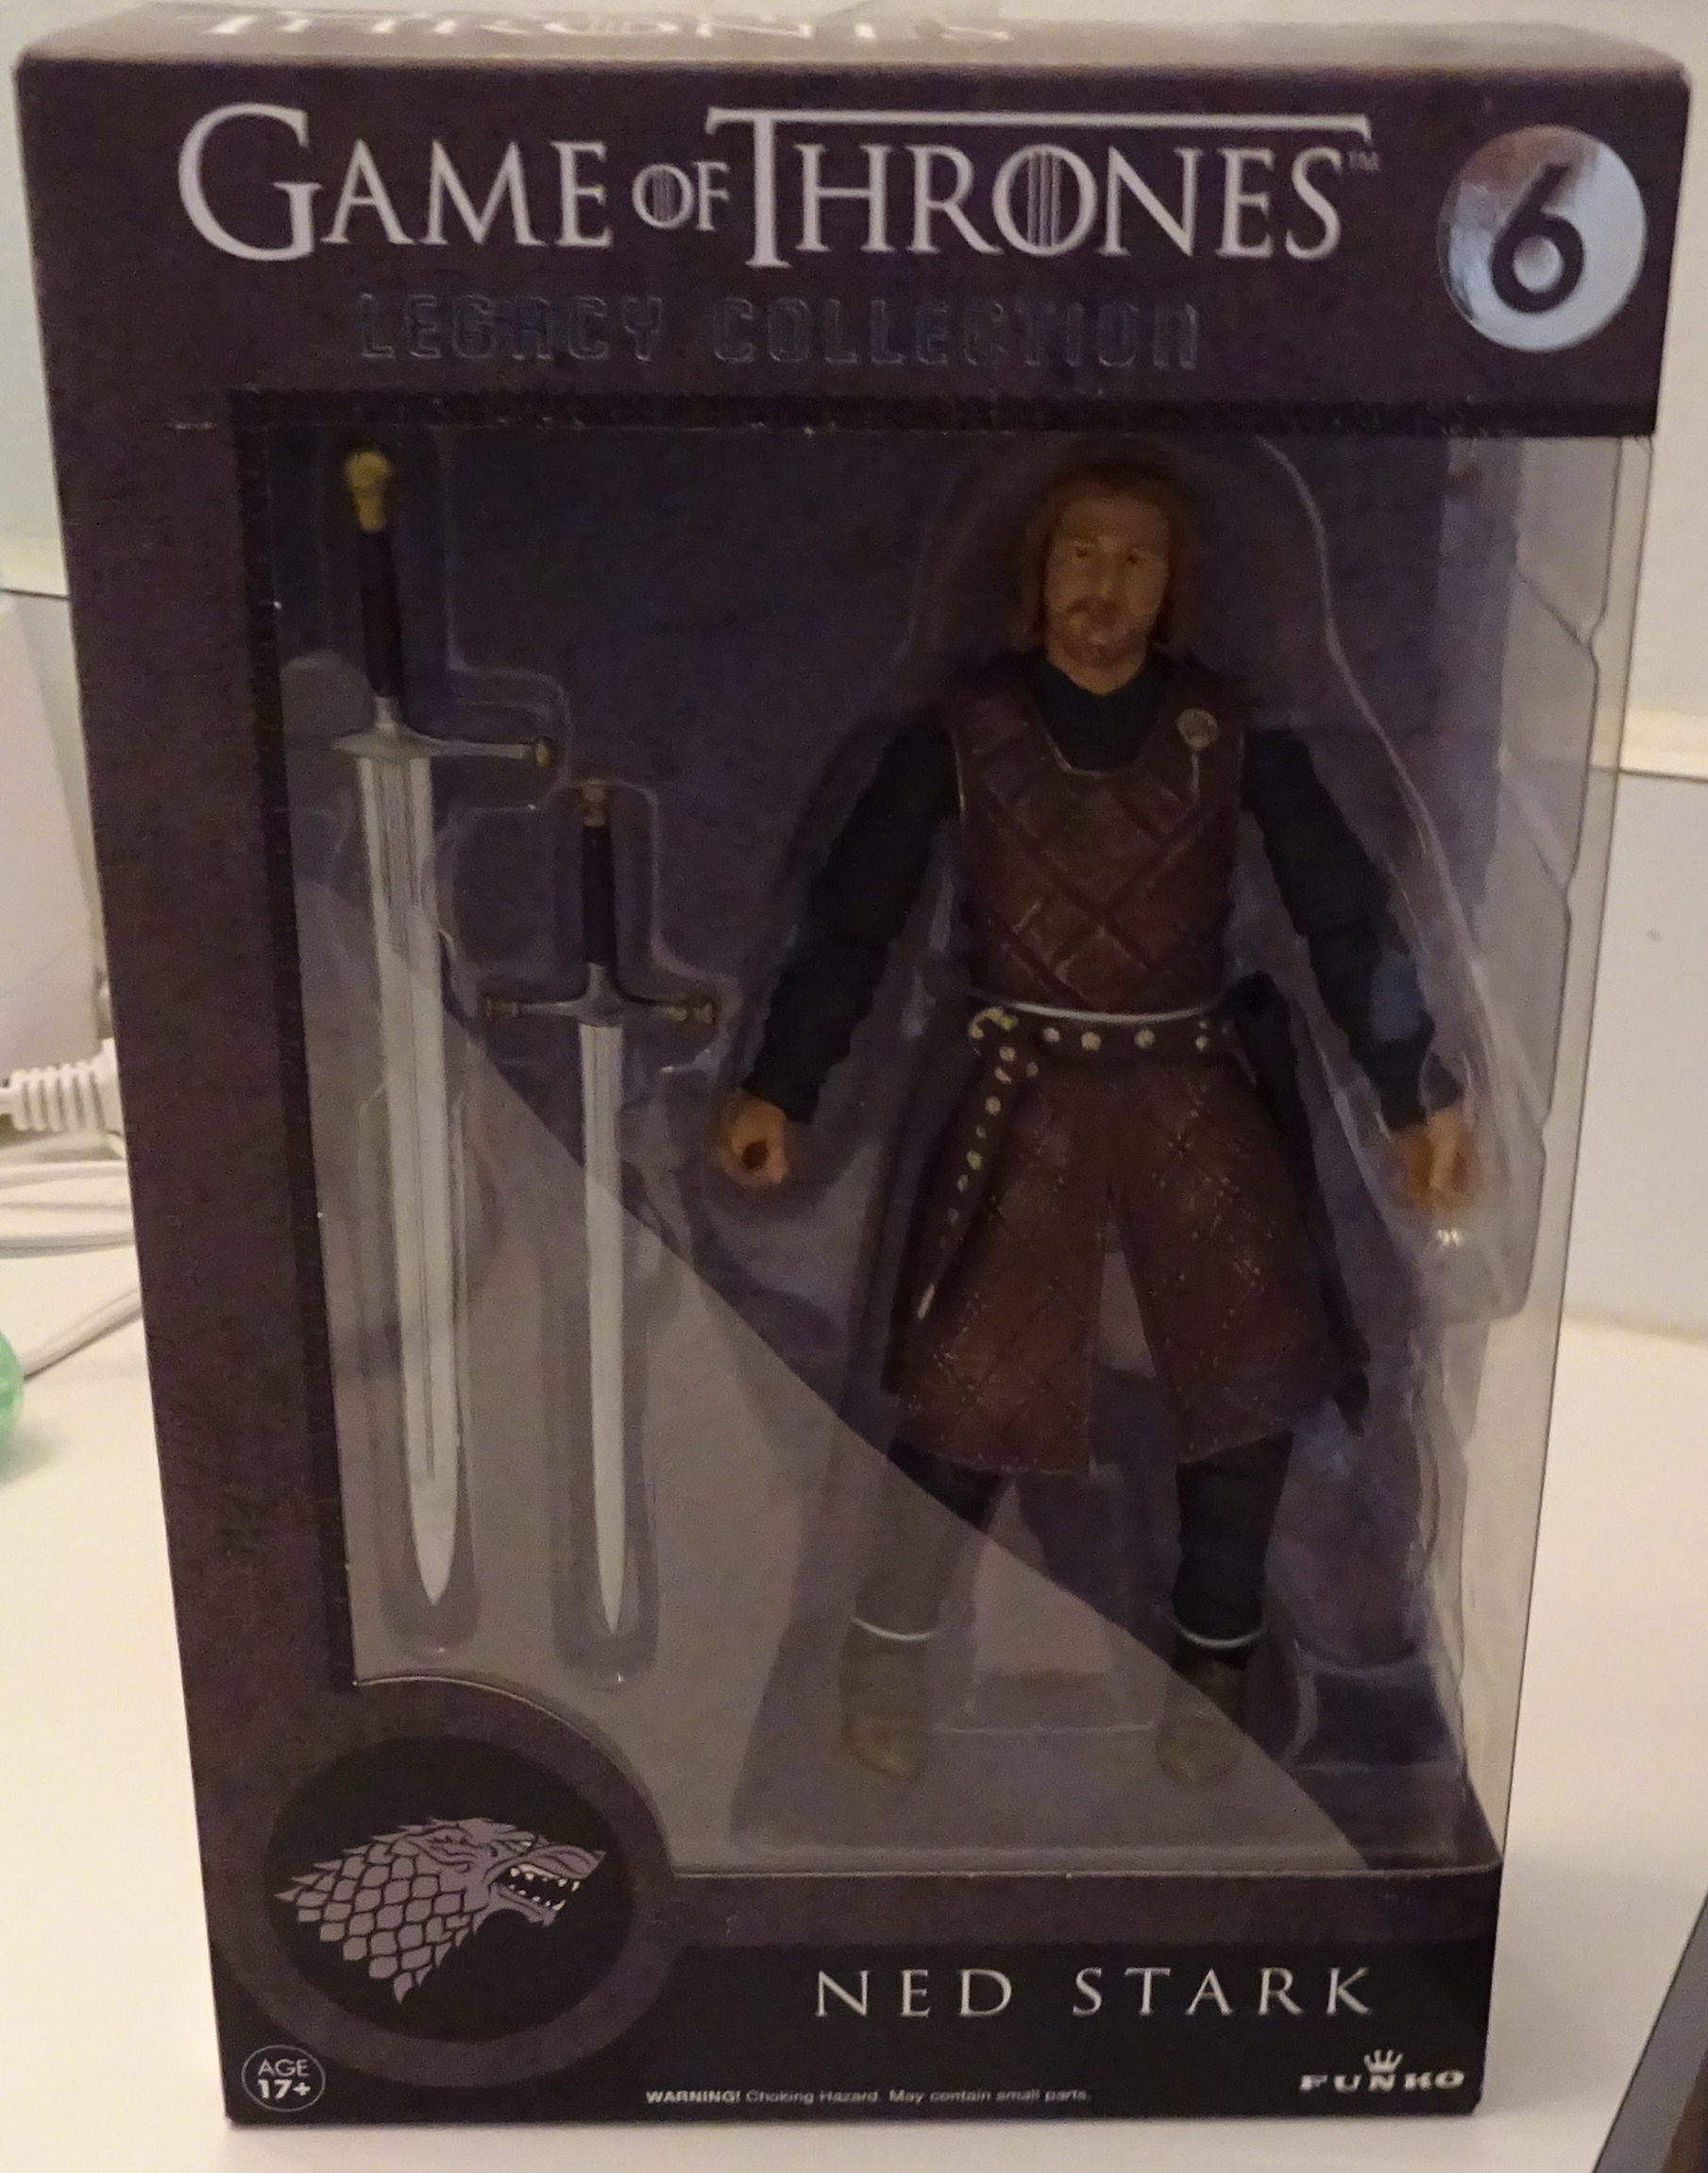 game of thrones action figures legacy collection